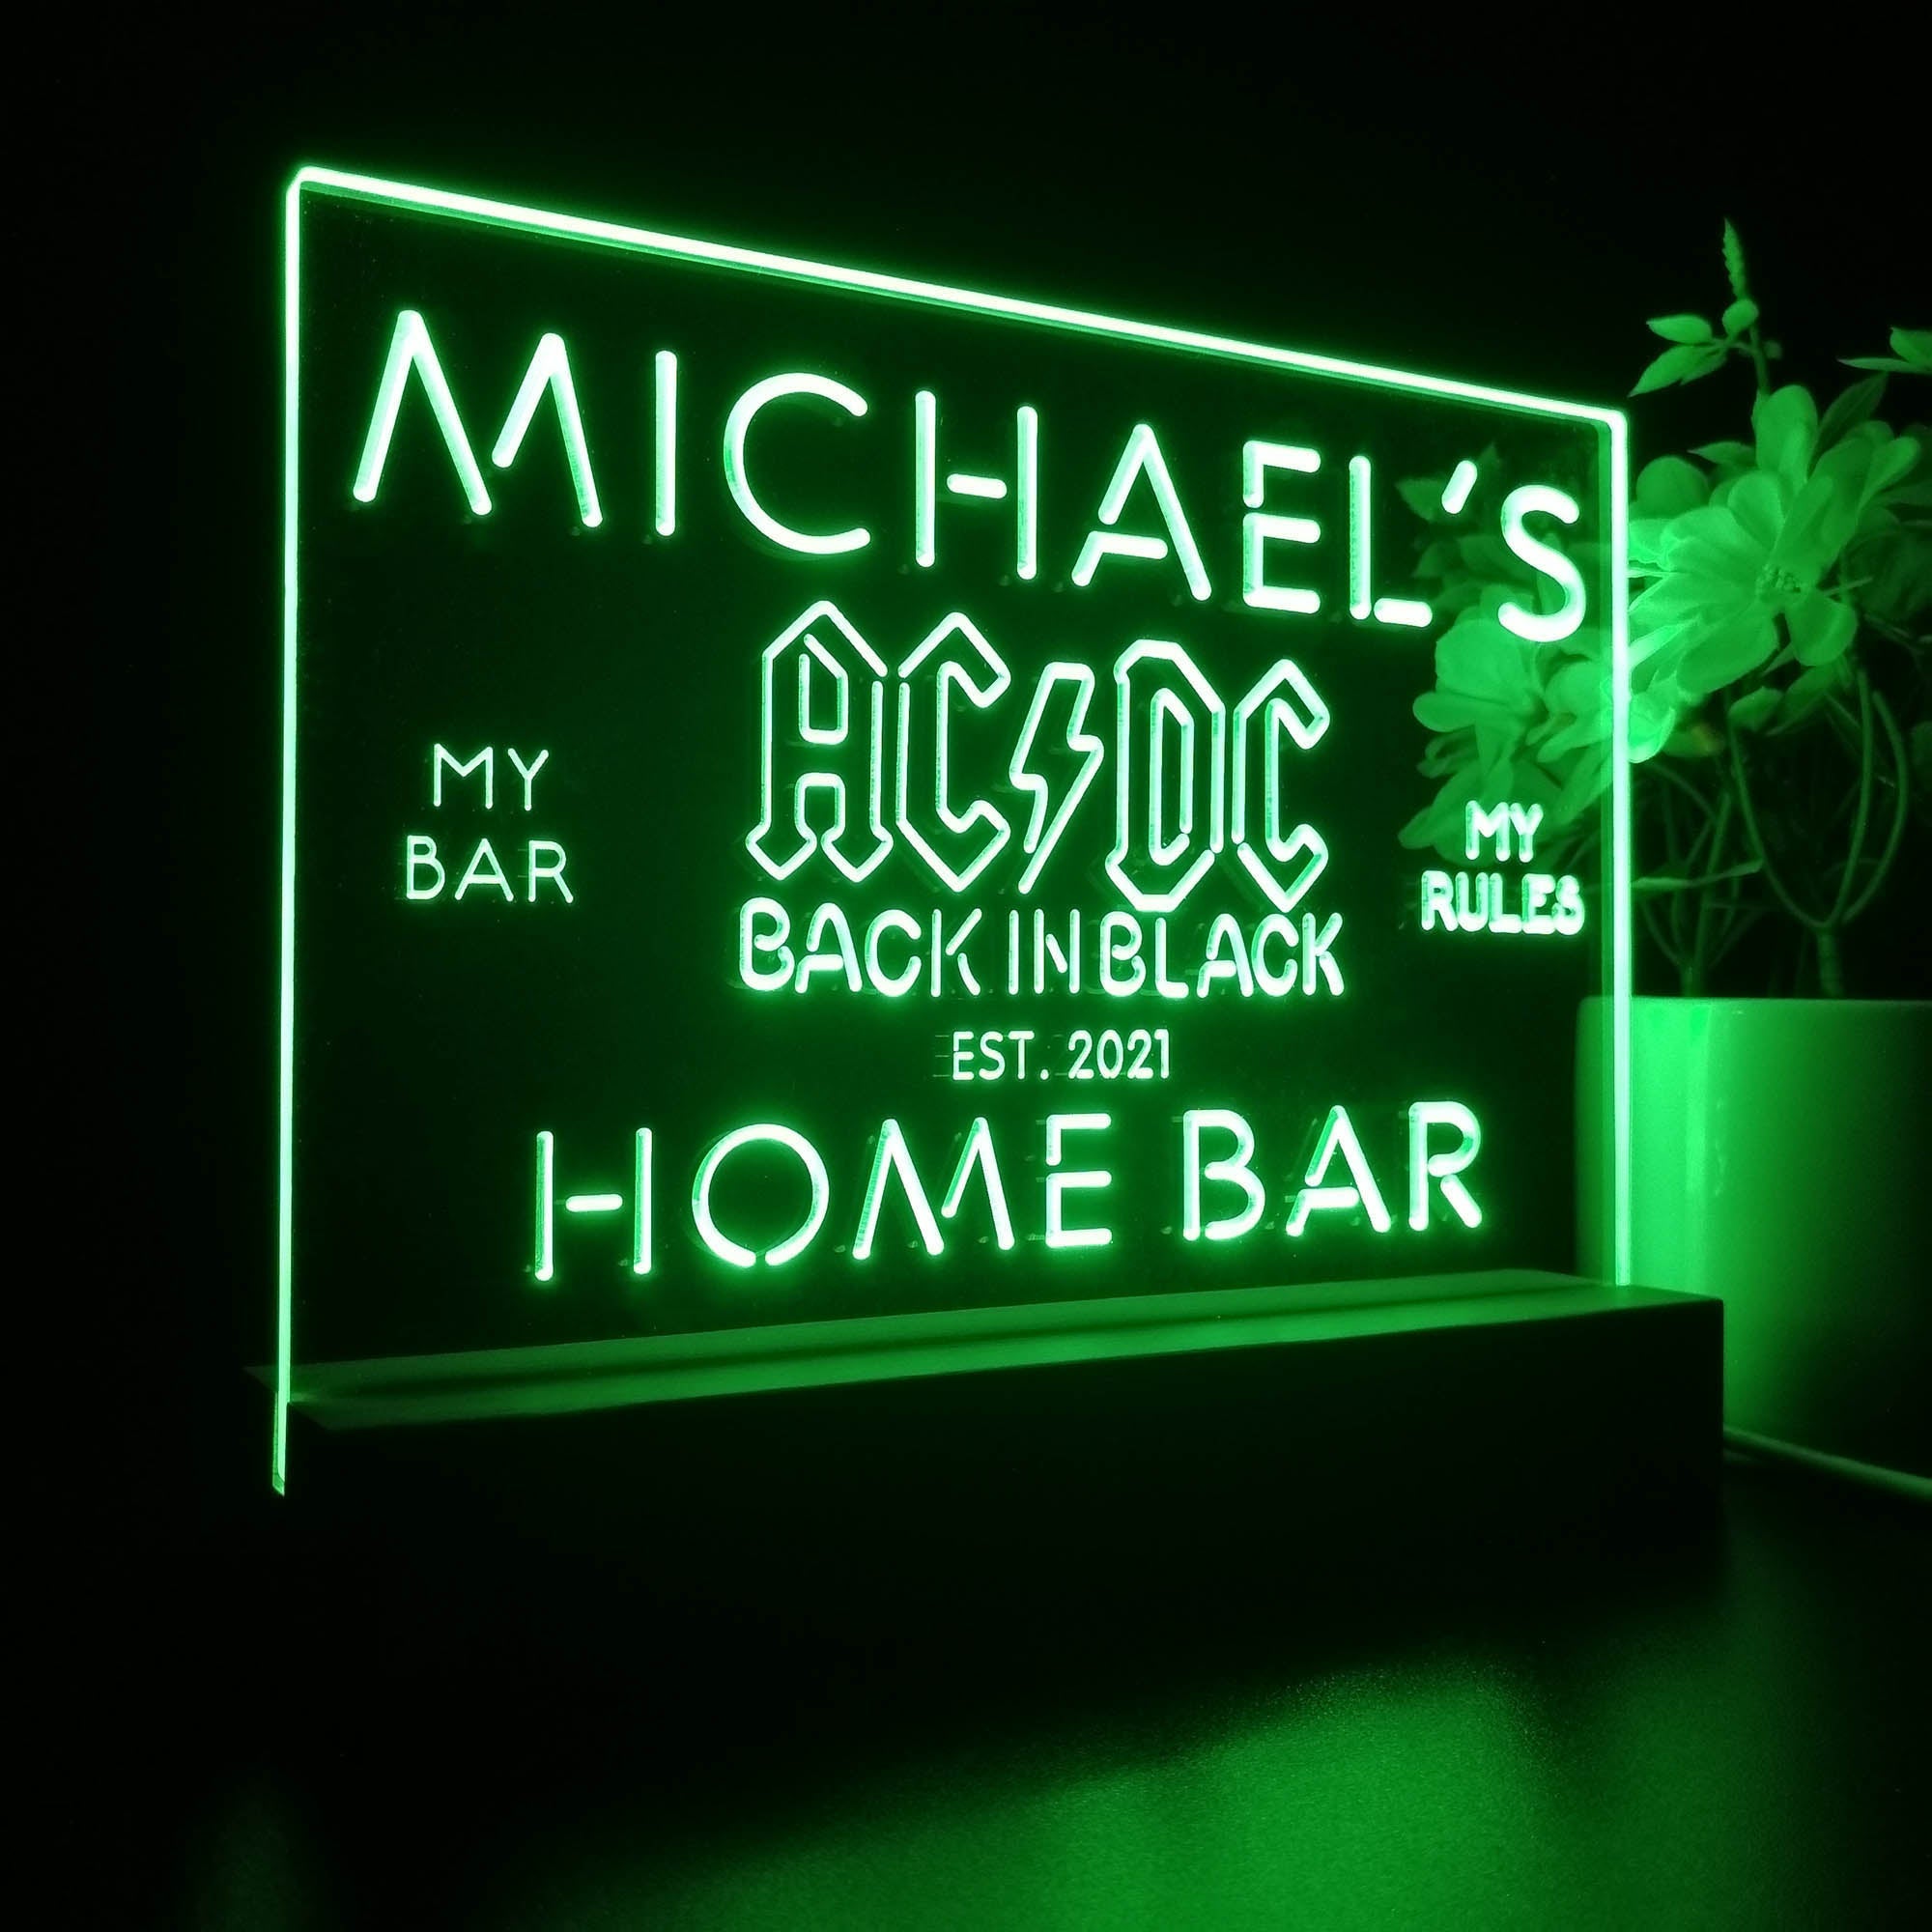 Personalized ACDC,Back In Black Souvenir Neon LED Night Light Sign